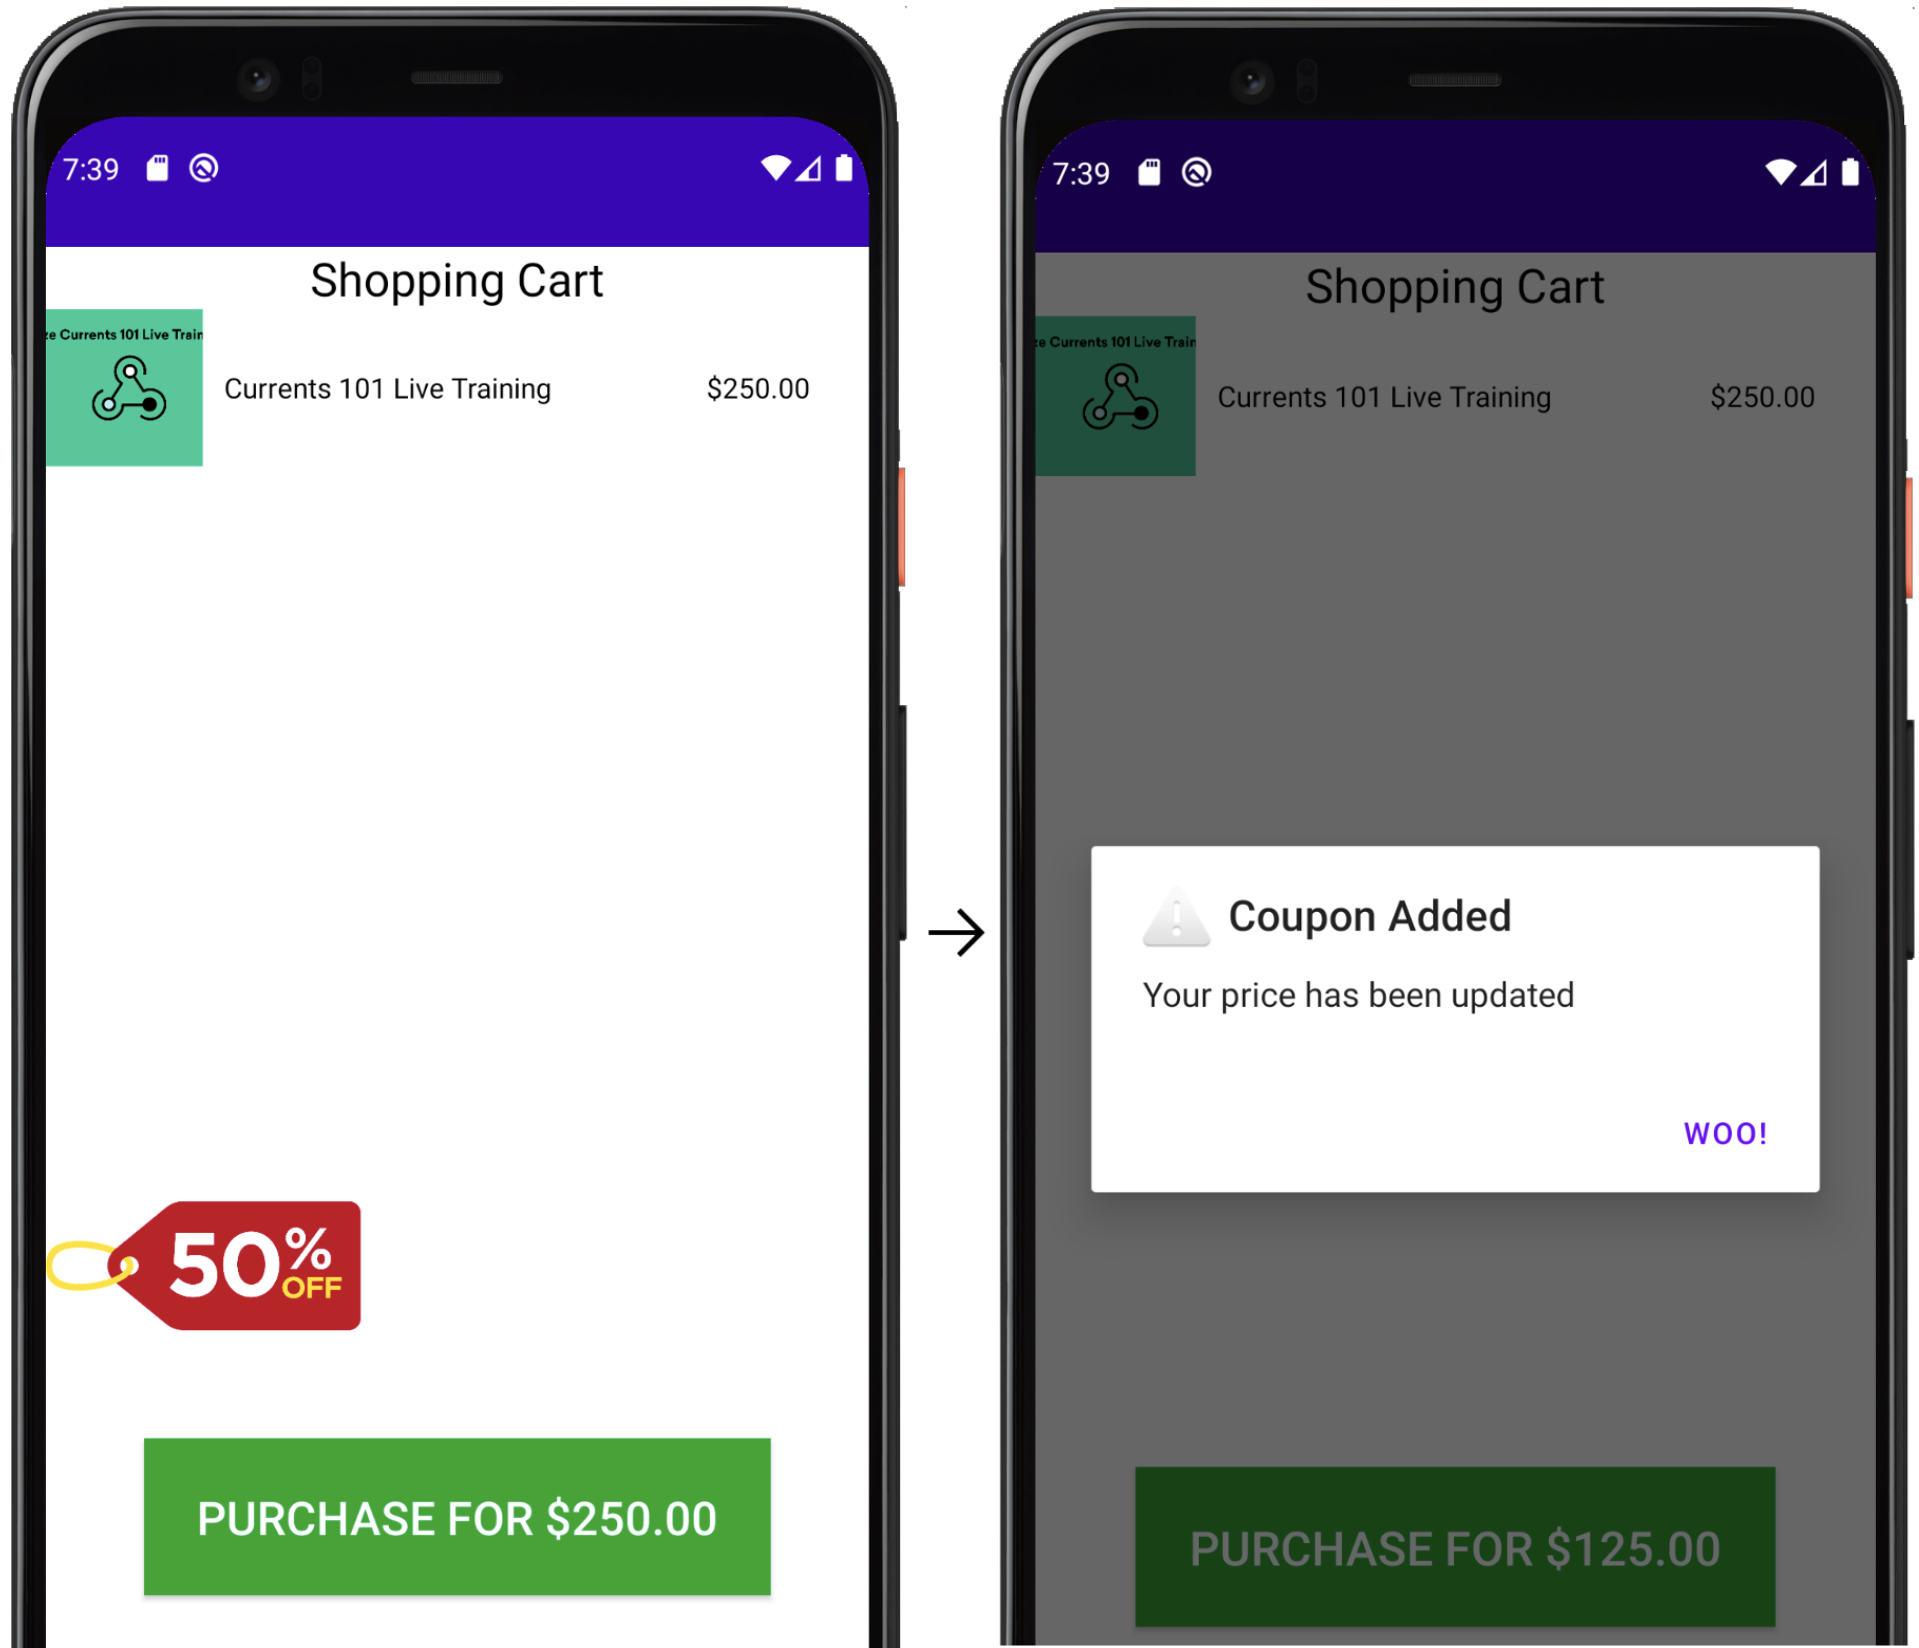 An interactive Content Card showing a 50% promotion appear in the botton left corner of the screen. Once clicked, a promotion will be applied to the cart.